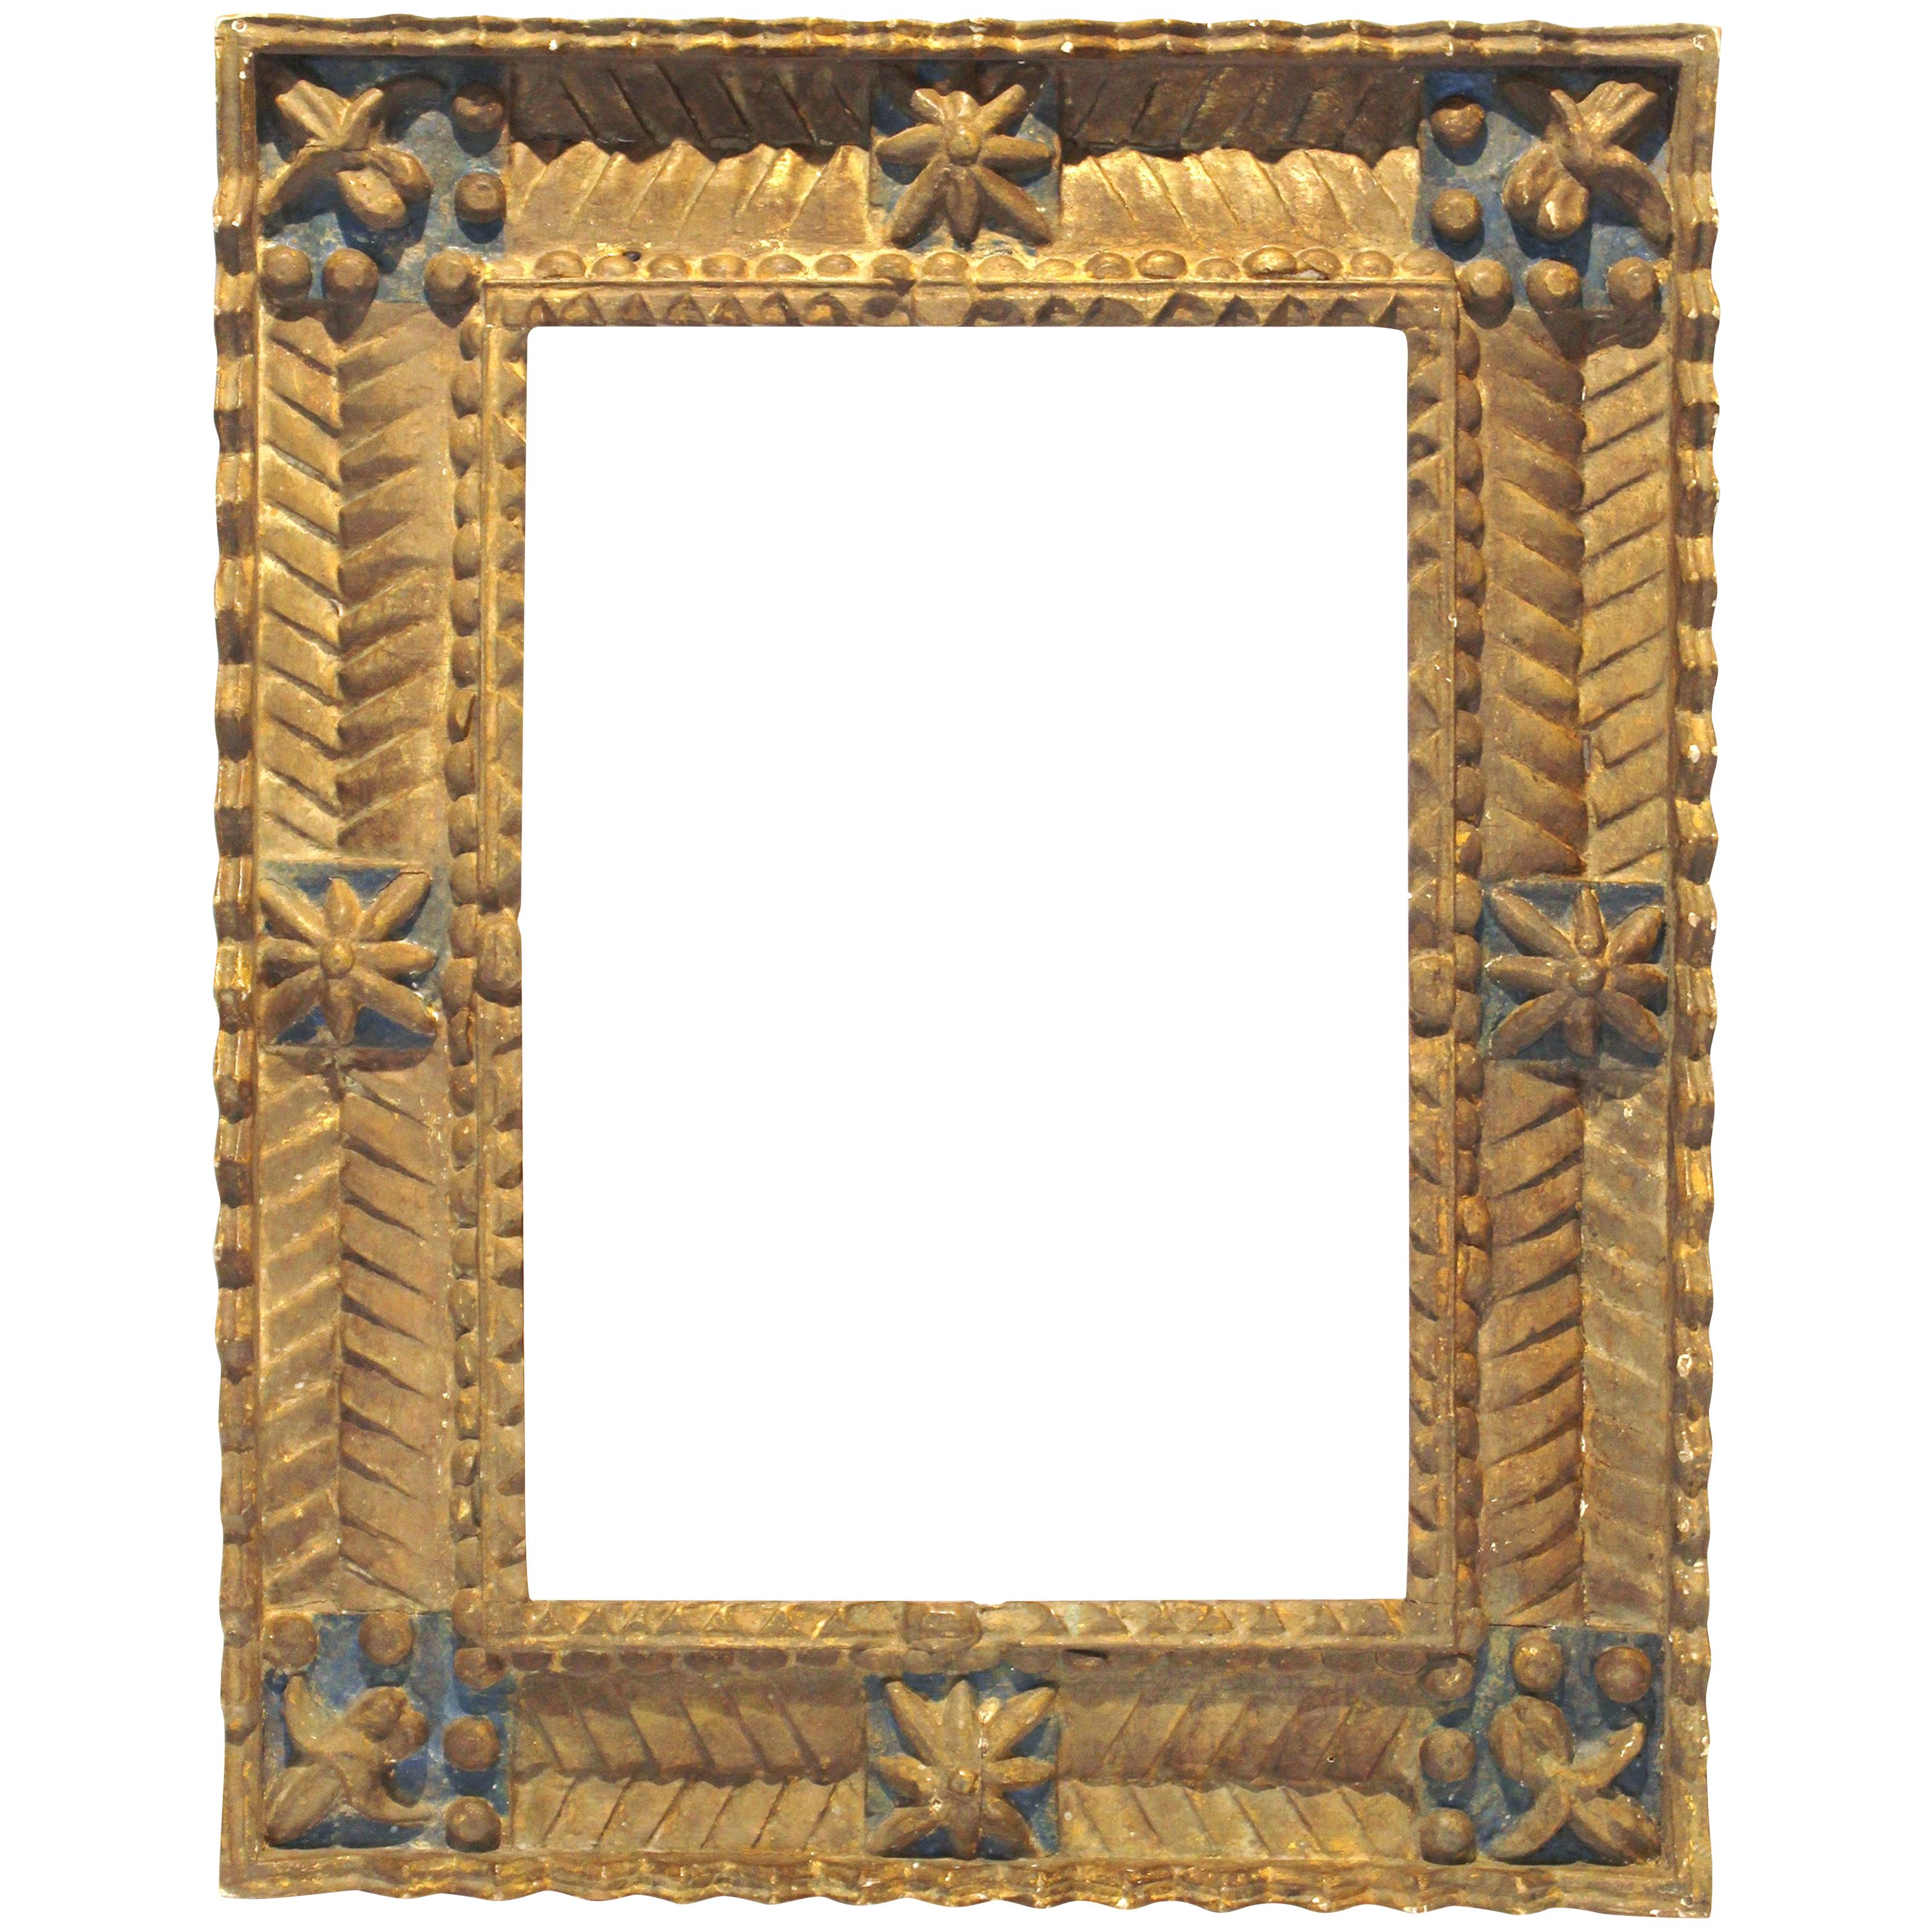 Spanish Colonial Baroque Deeply Carved Geometric Wood Frame For Sale